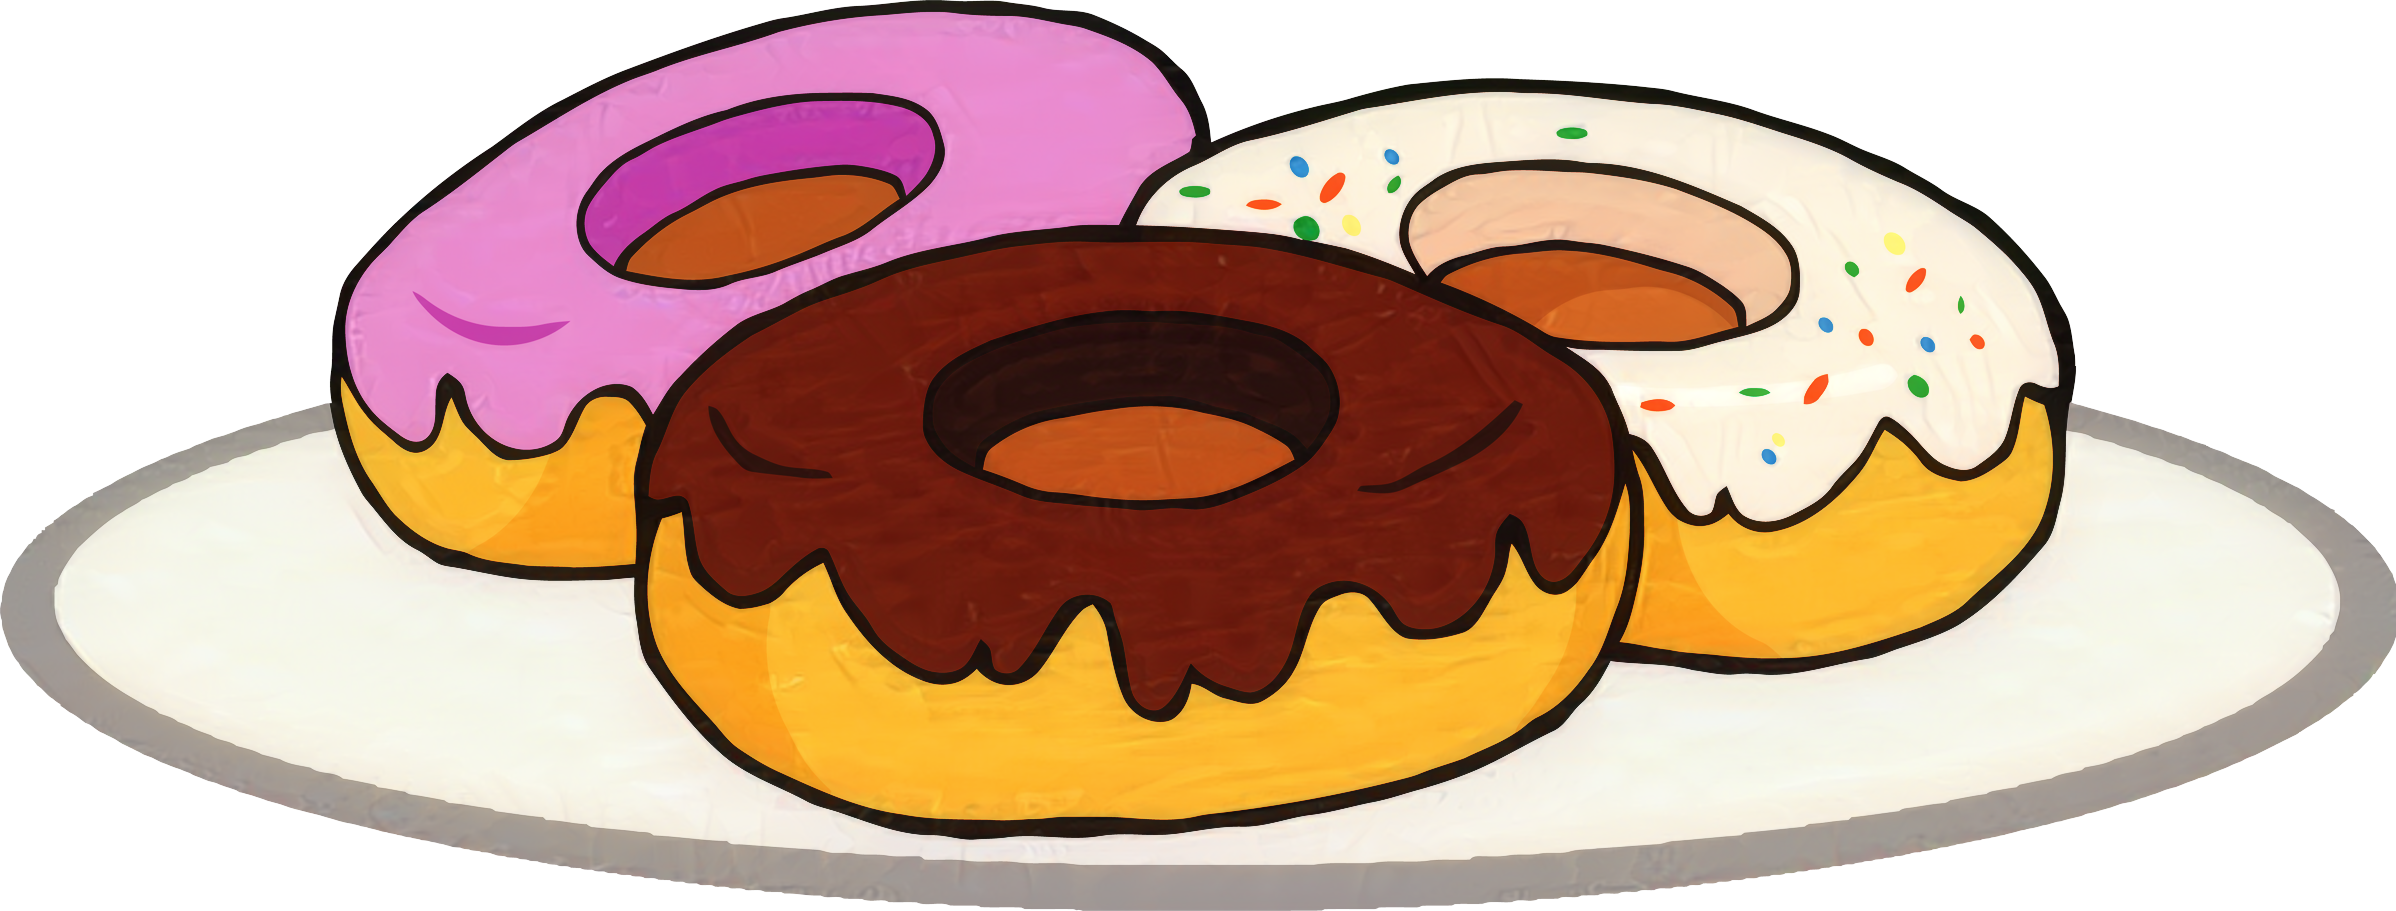 donuts clipart real donut